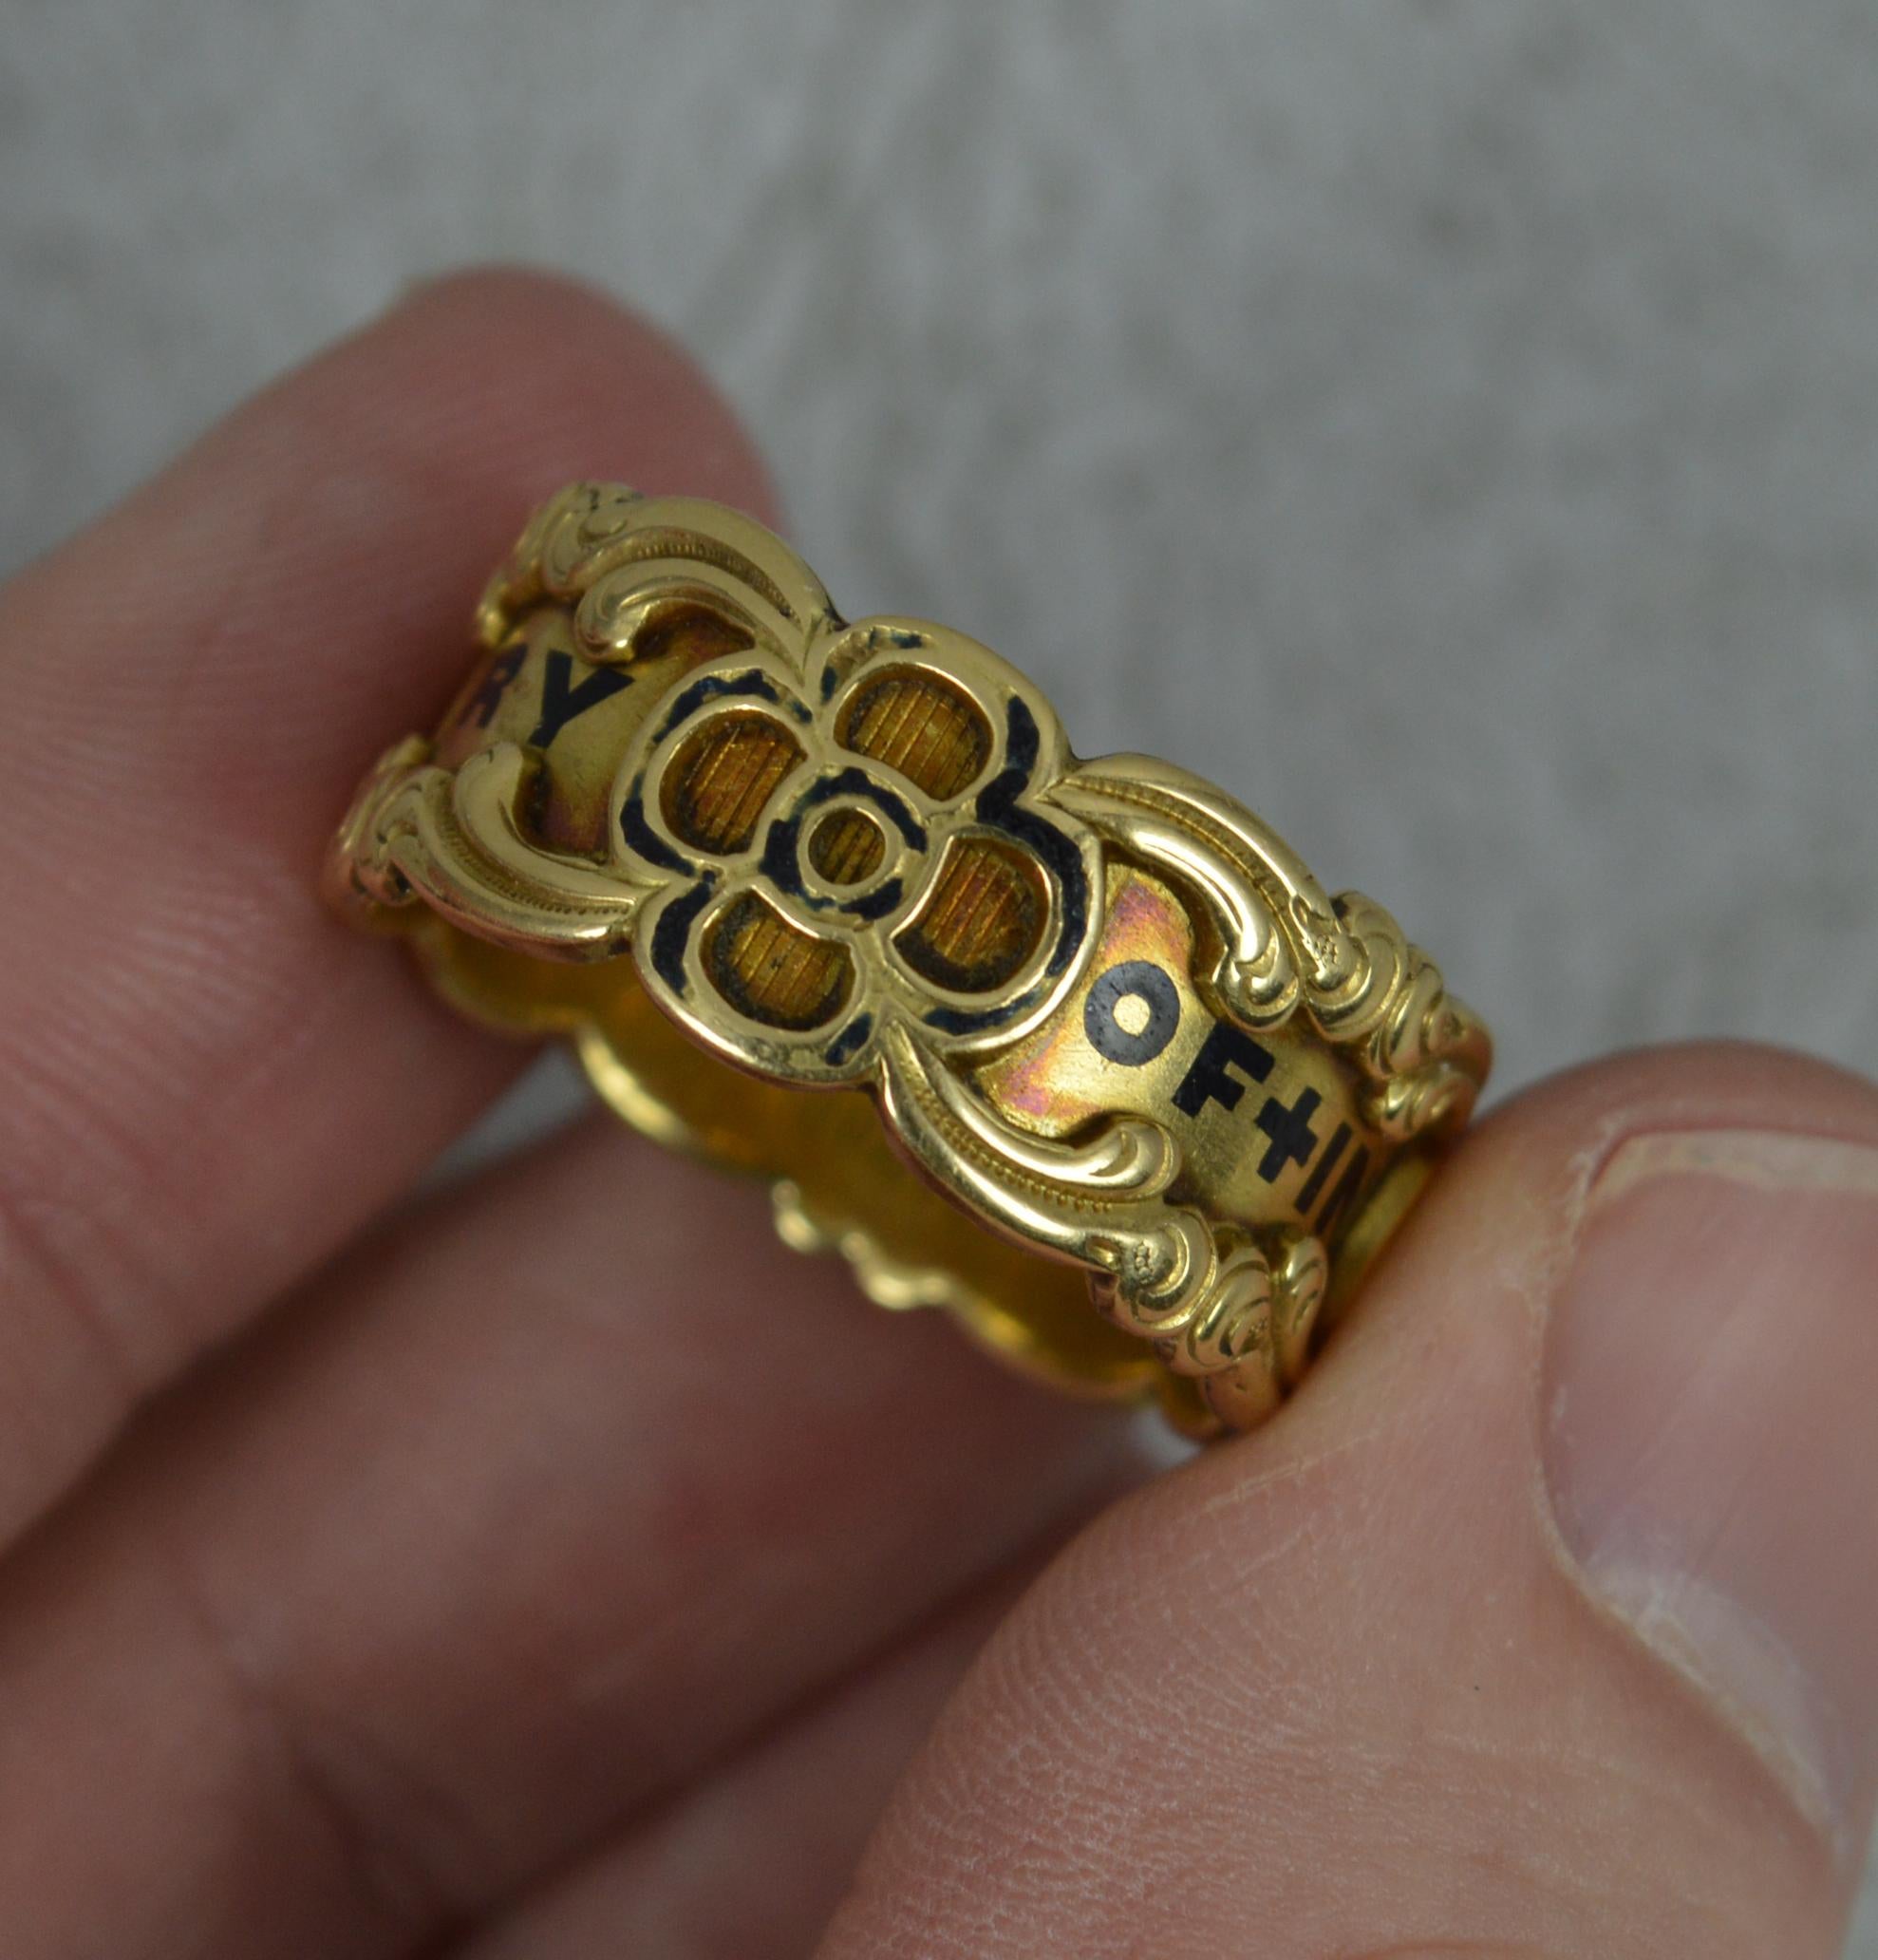 1842 Victorian 18 Carat Gold Enamel In Memory of Mourning Band Ring For Sale 4